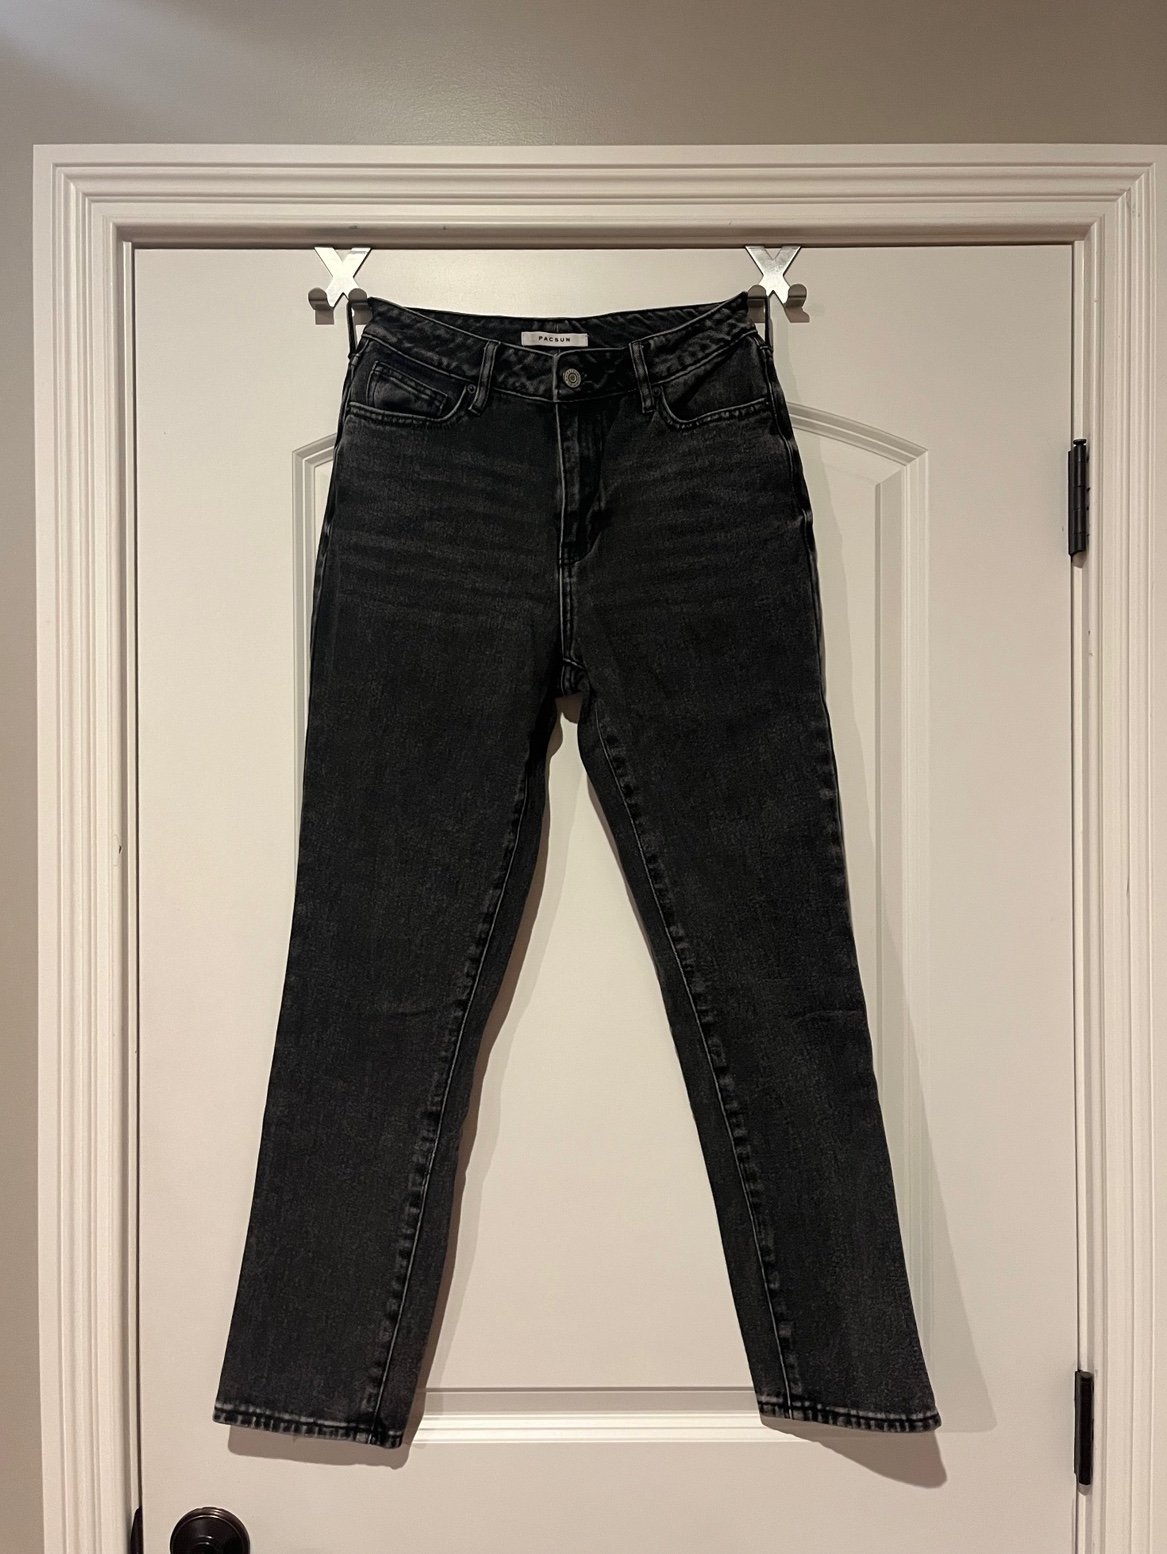 Special offer  PacSun Mom Jeans FNLqsM6fi Online Shop